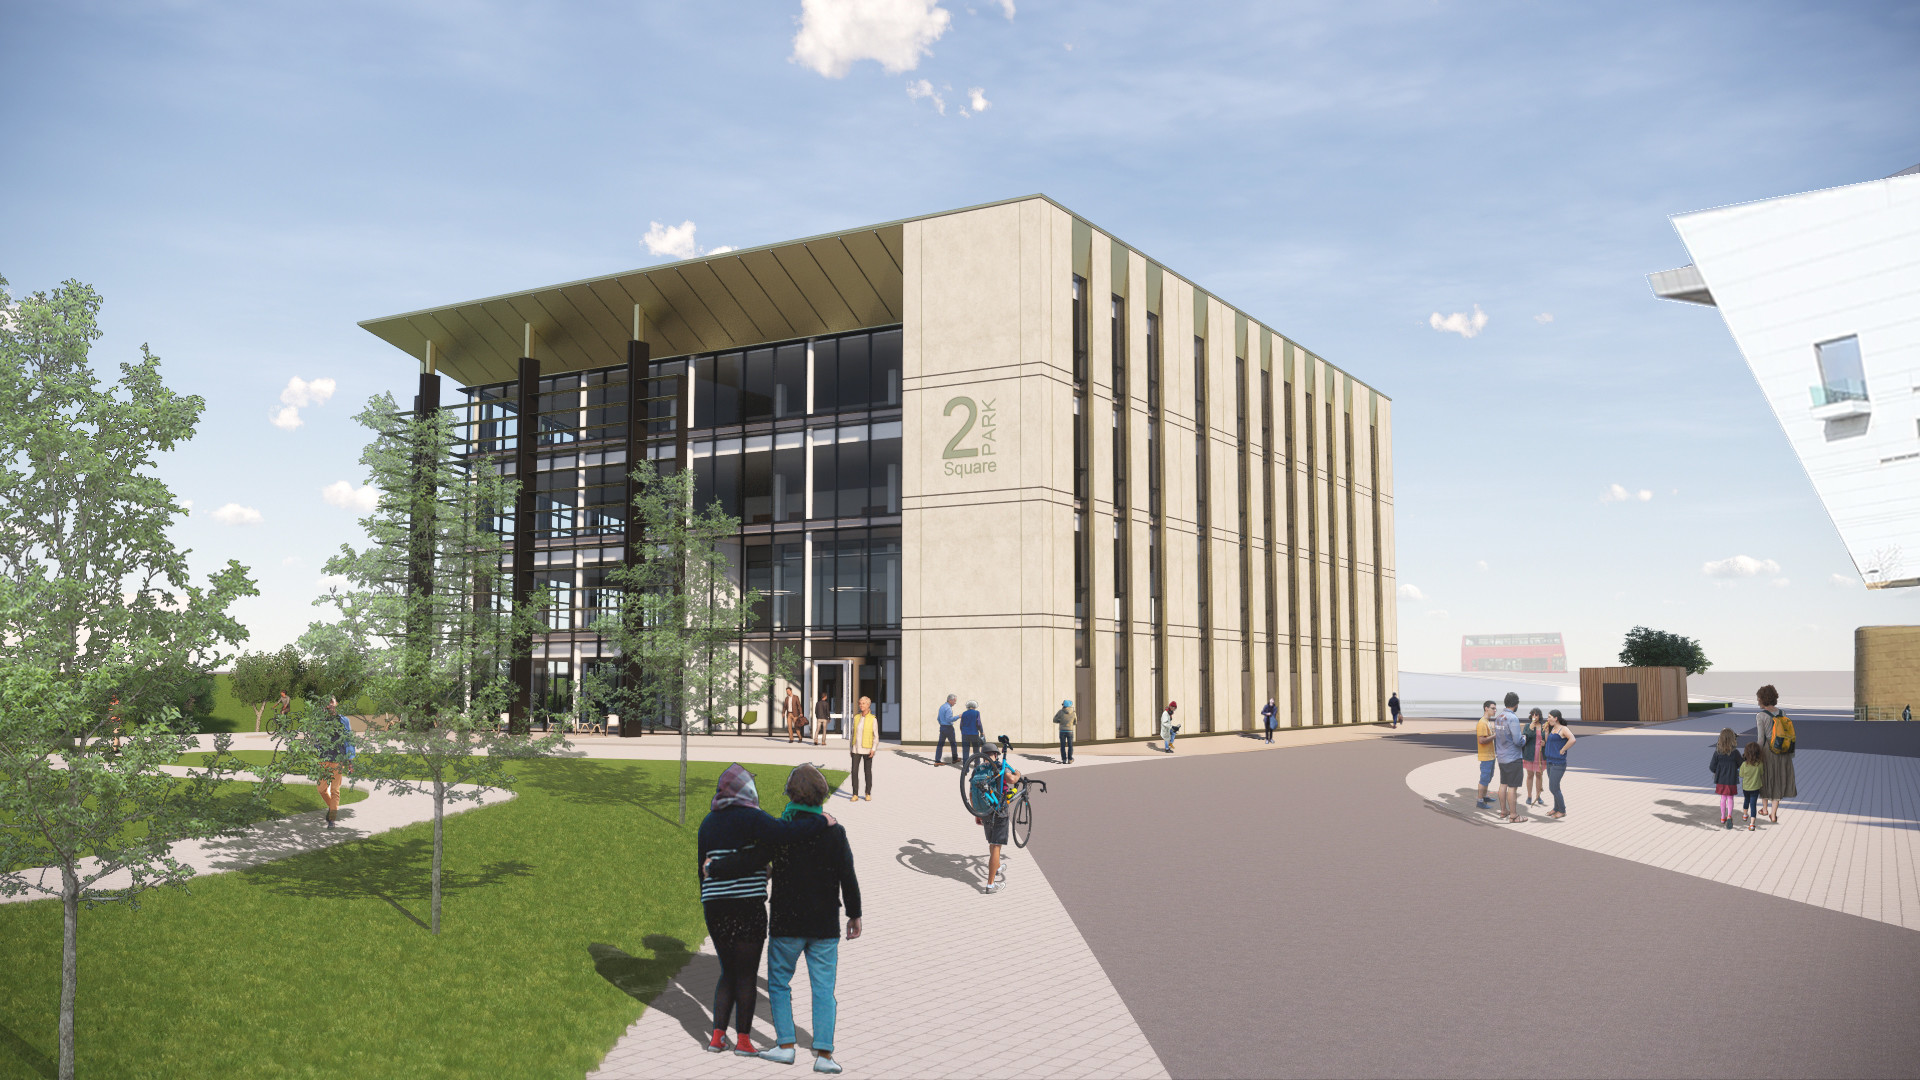 2 Park Square will be the latest regeneration project on the site of the former MG Rover works in Longbridge, Birmingham